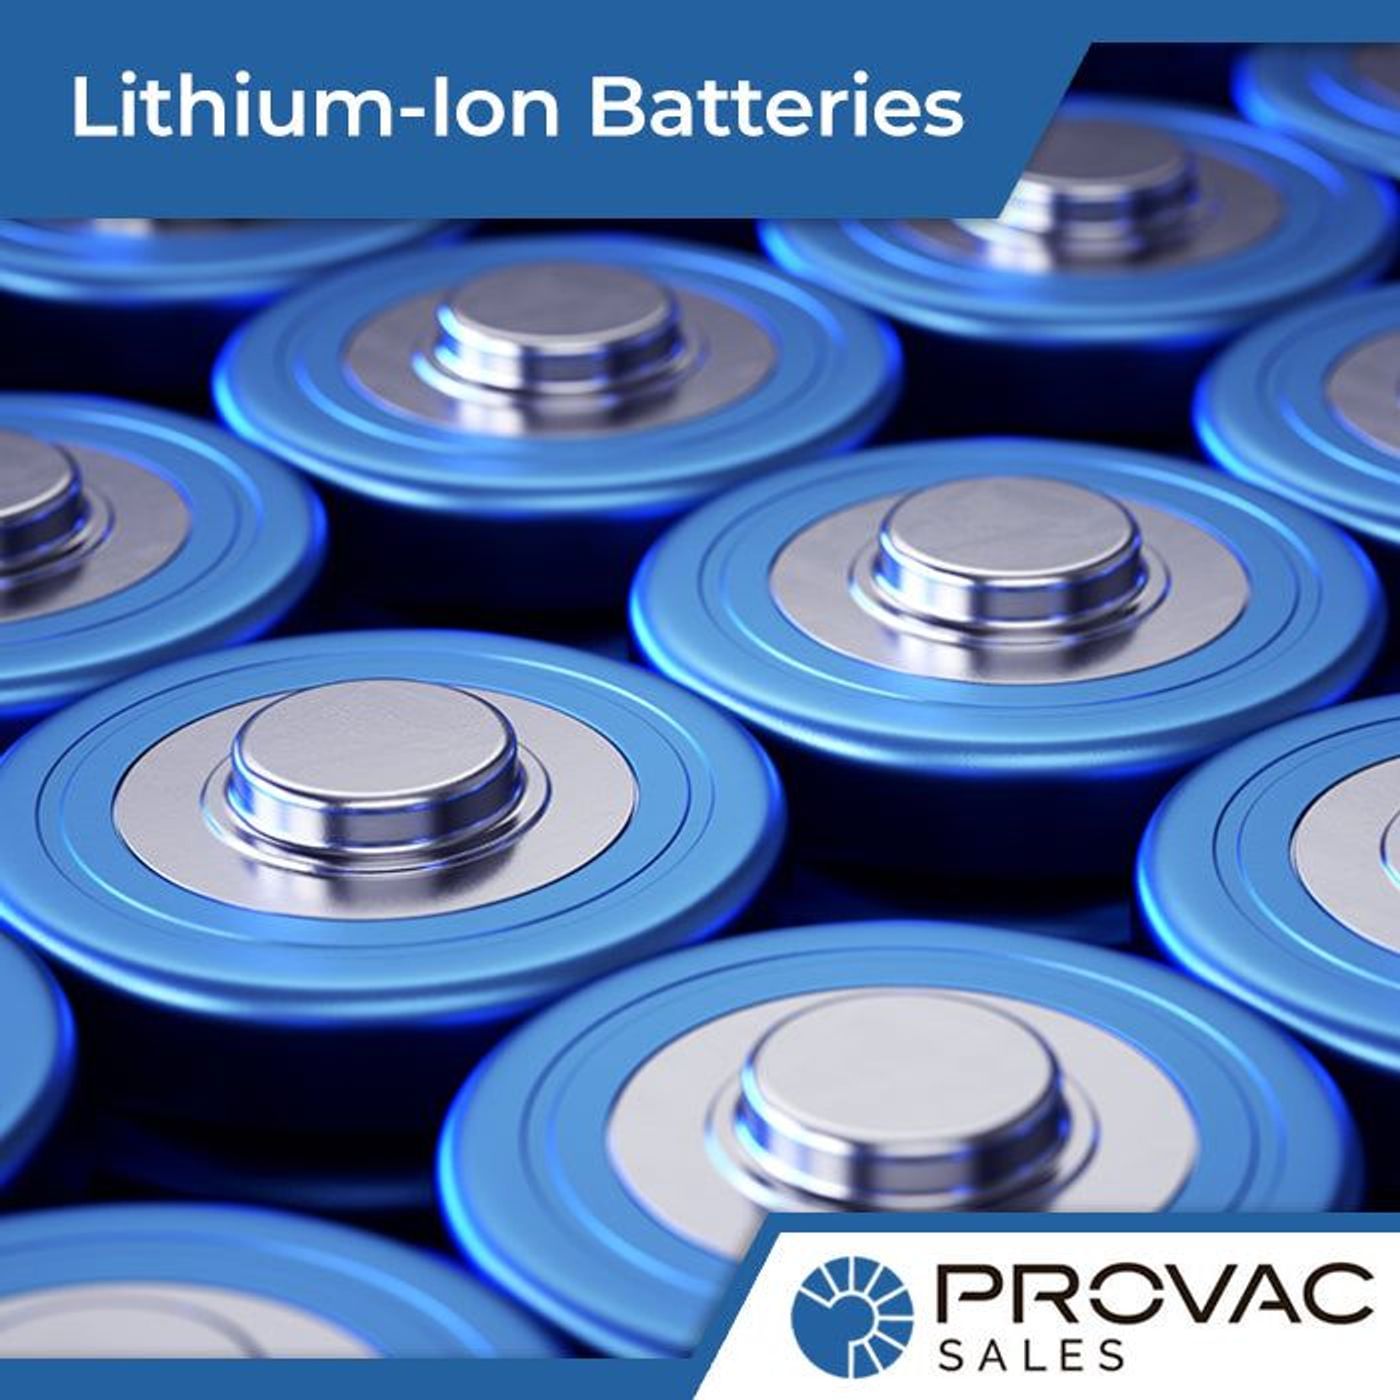 The Use of Vacuum for Manufacturing Lithium-Ion Batteries